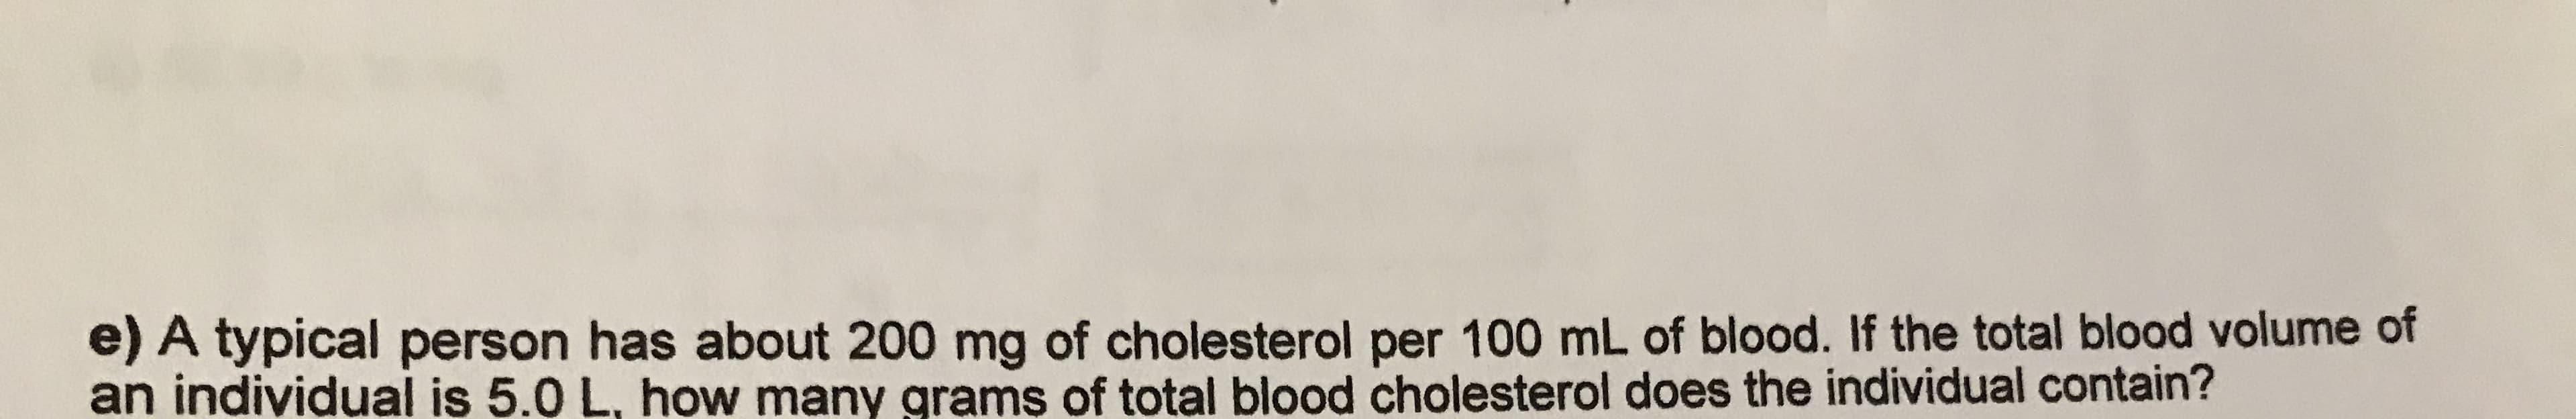 e) A typical person has about 200 mg of cholesterol per 100 mL of blood. If the total blood volume of
an indiyidual is 5.0 L. how many grams of total blood cholesterol does the individual contain?
